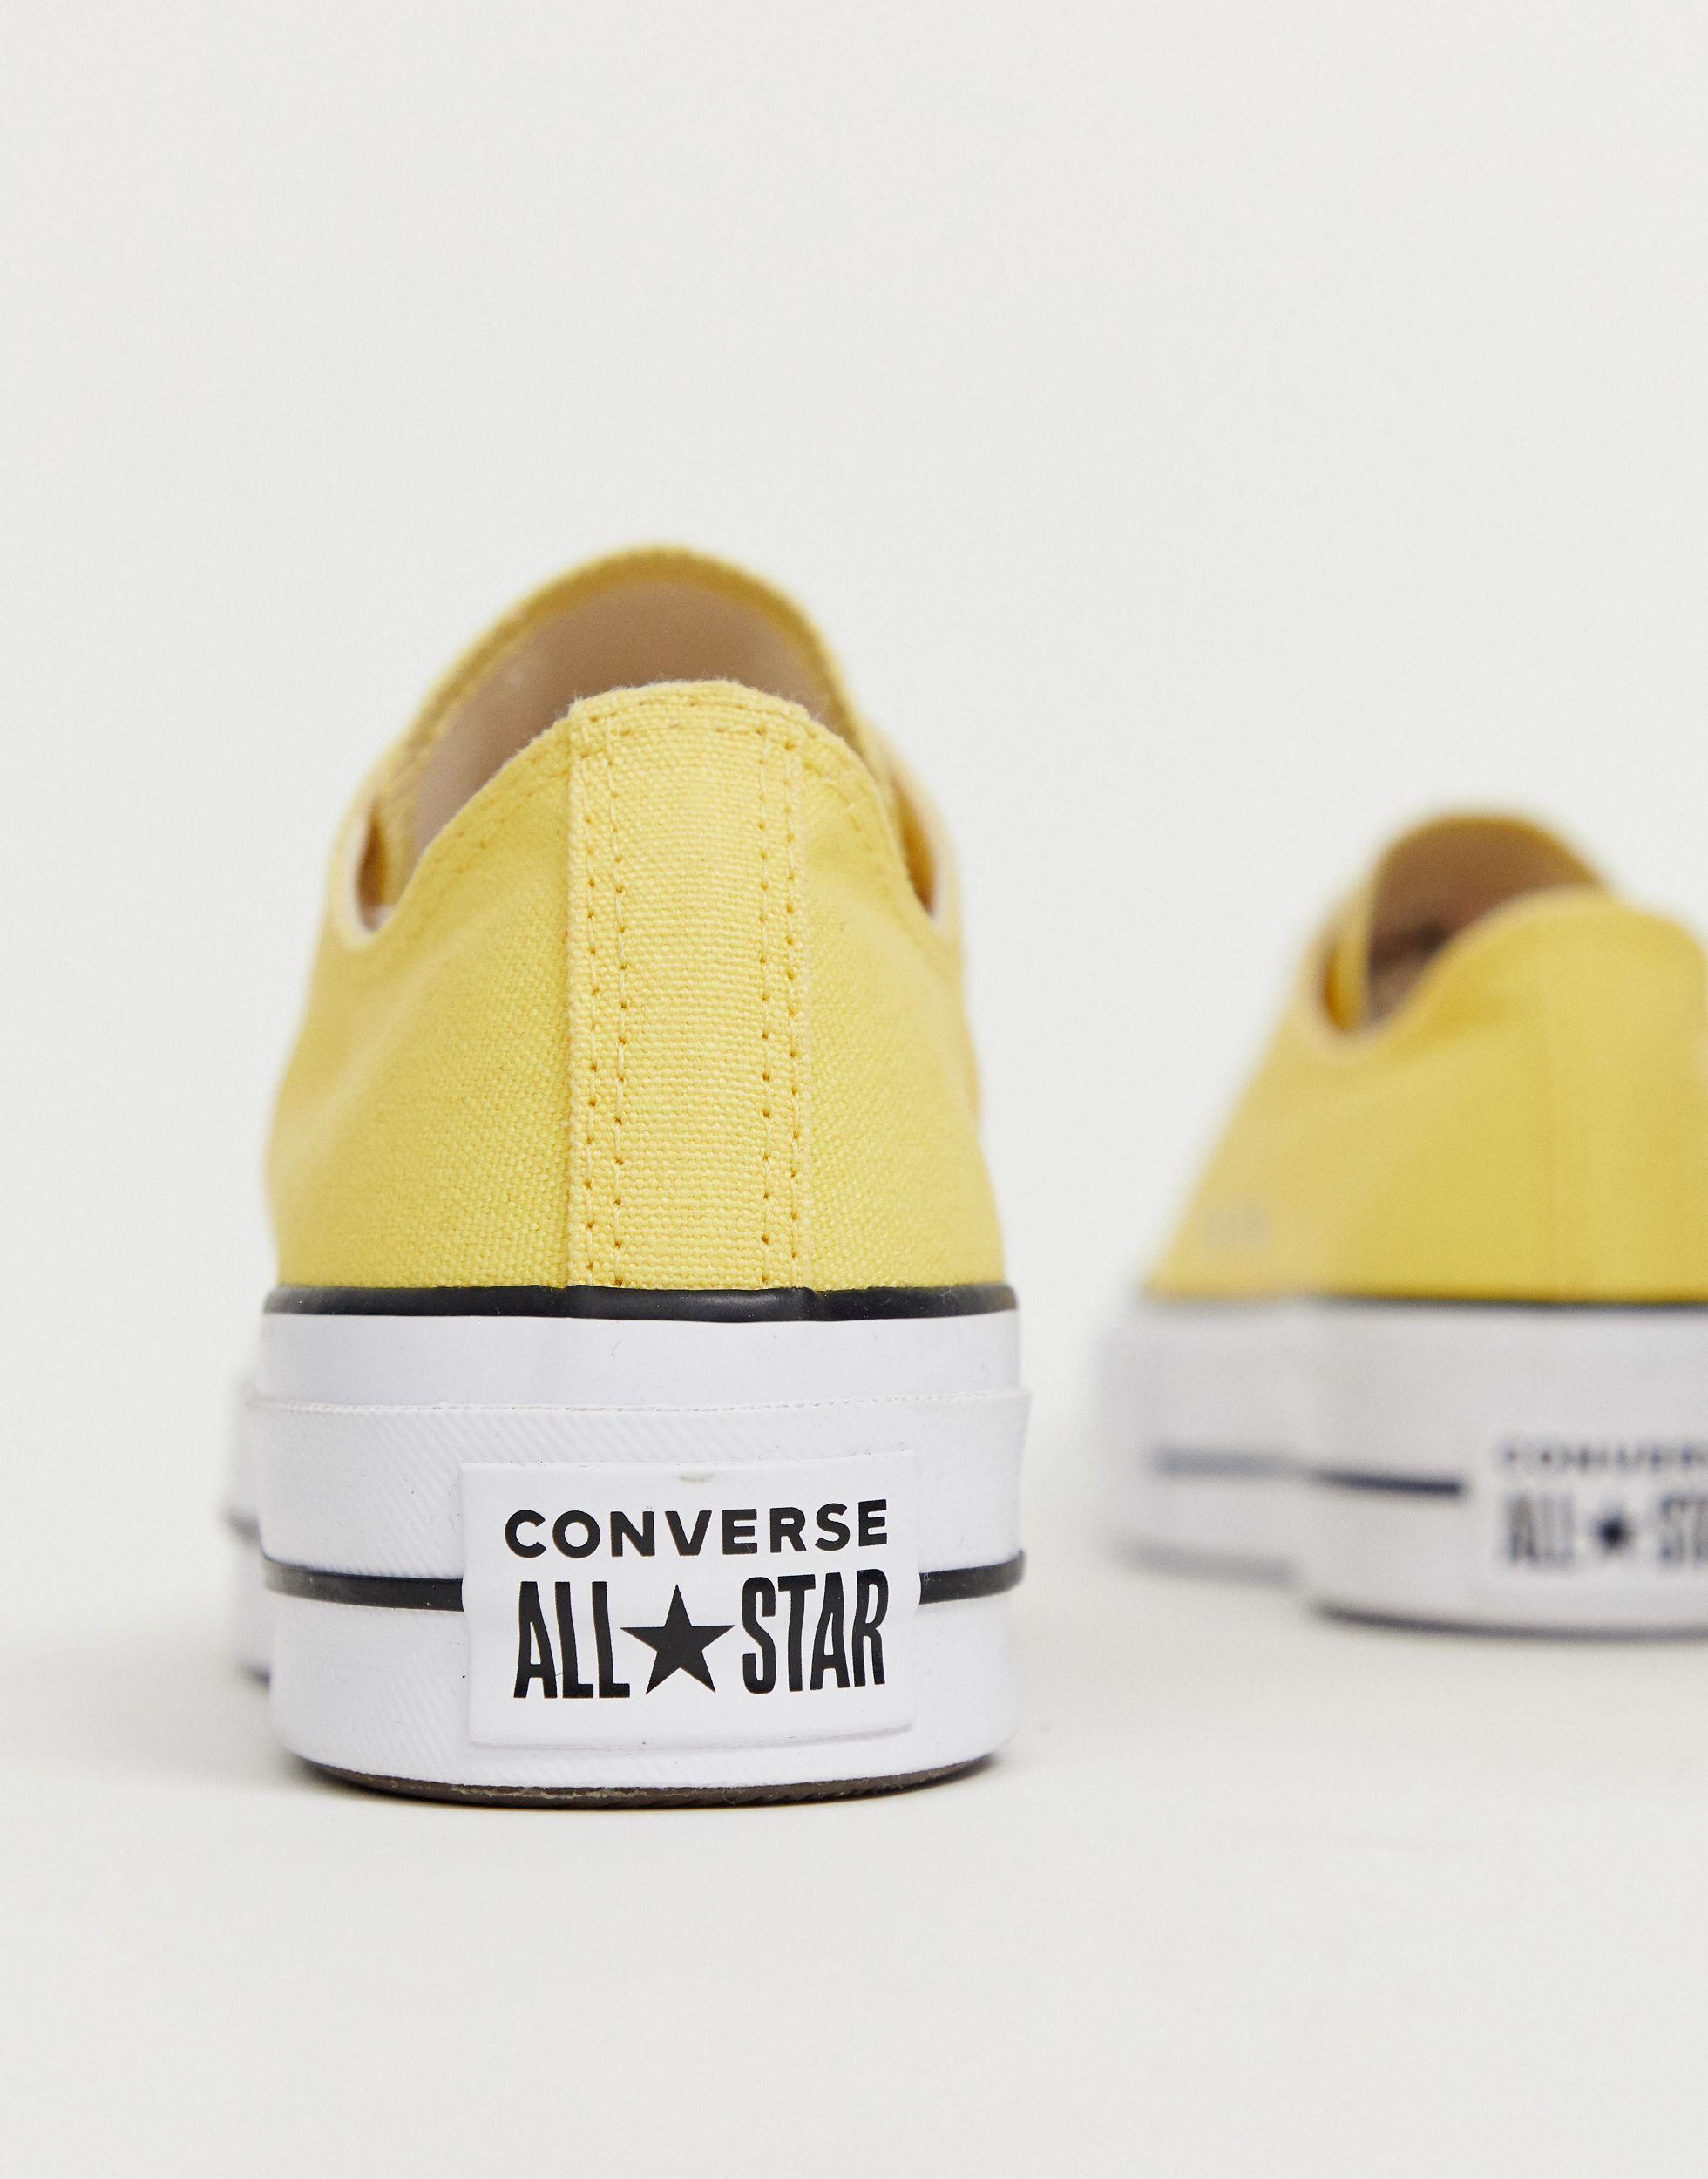 Converse Canvas Chuck Taylor All Star Lo Yellow Platform Trainers | Lyst